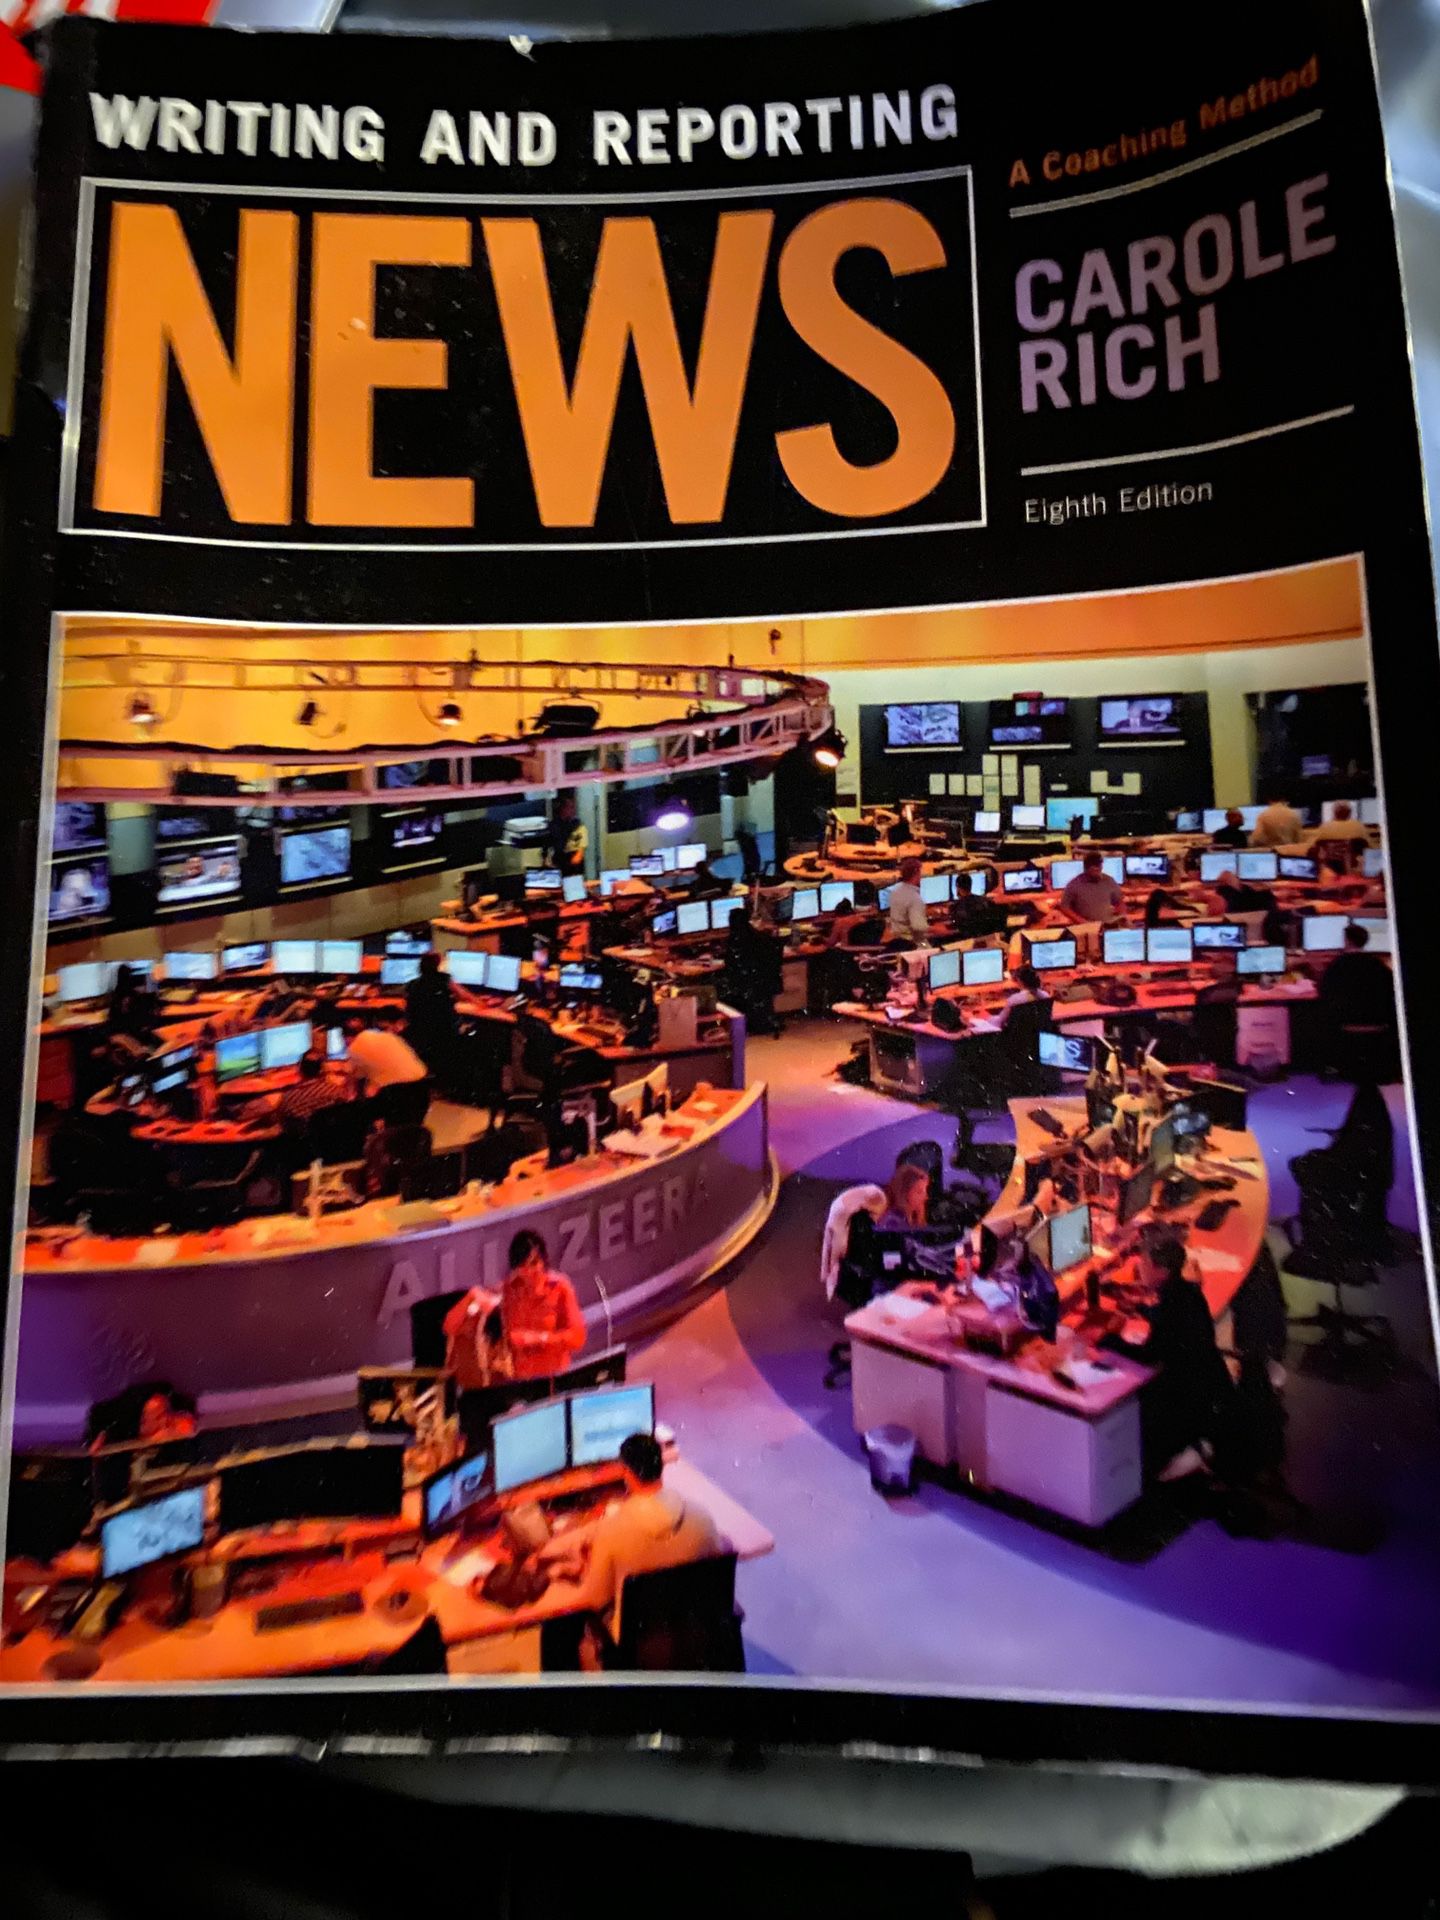 Writing and reporting news by Carole Rich